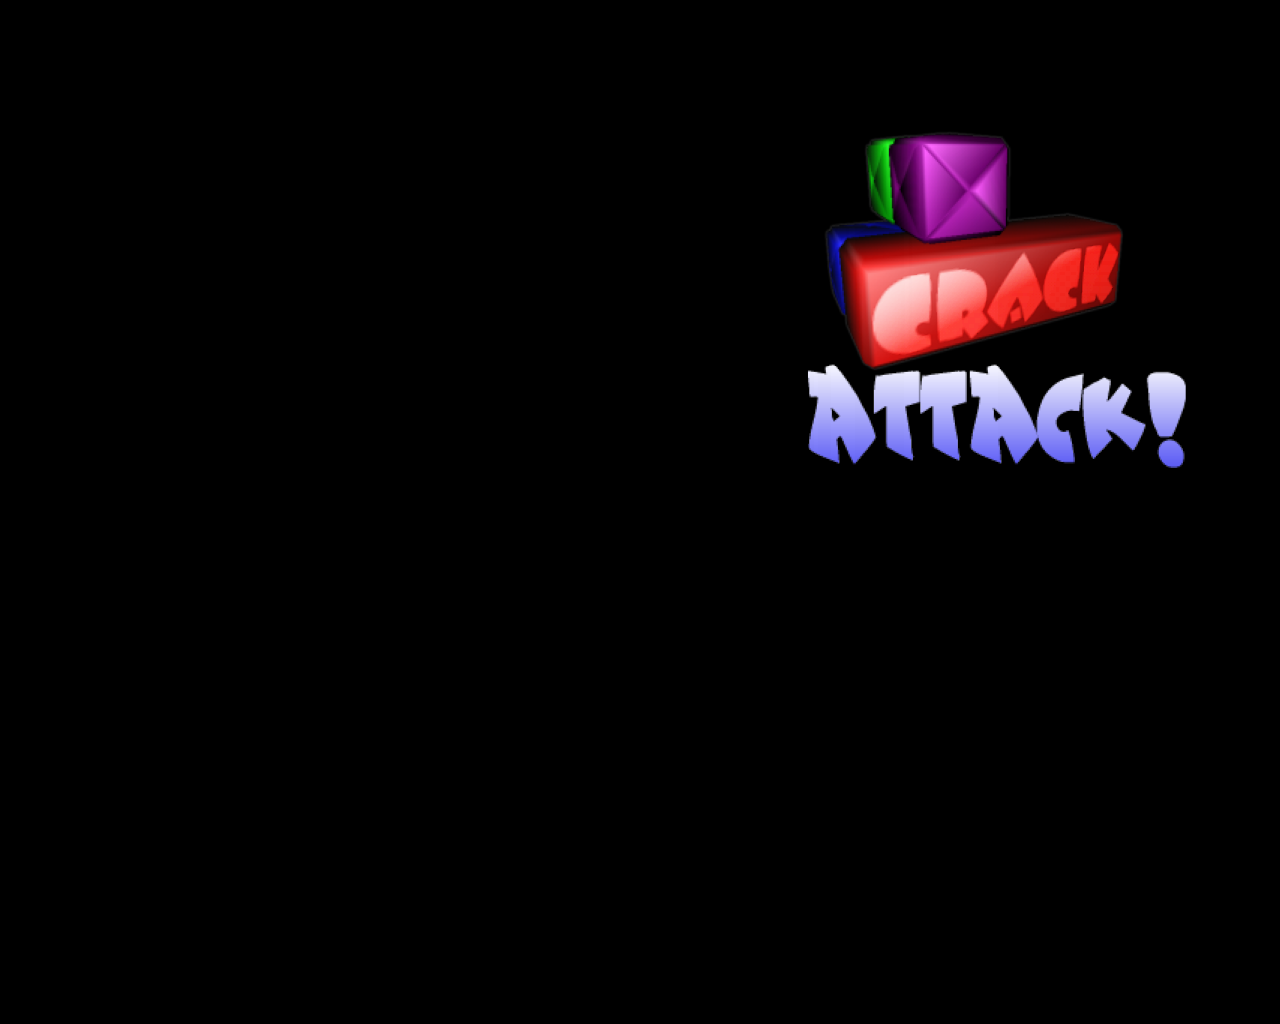 Crack Attack! - The Portable Freeware Collection